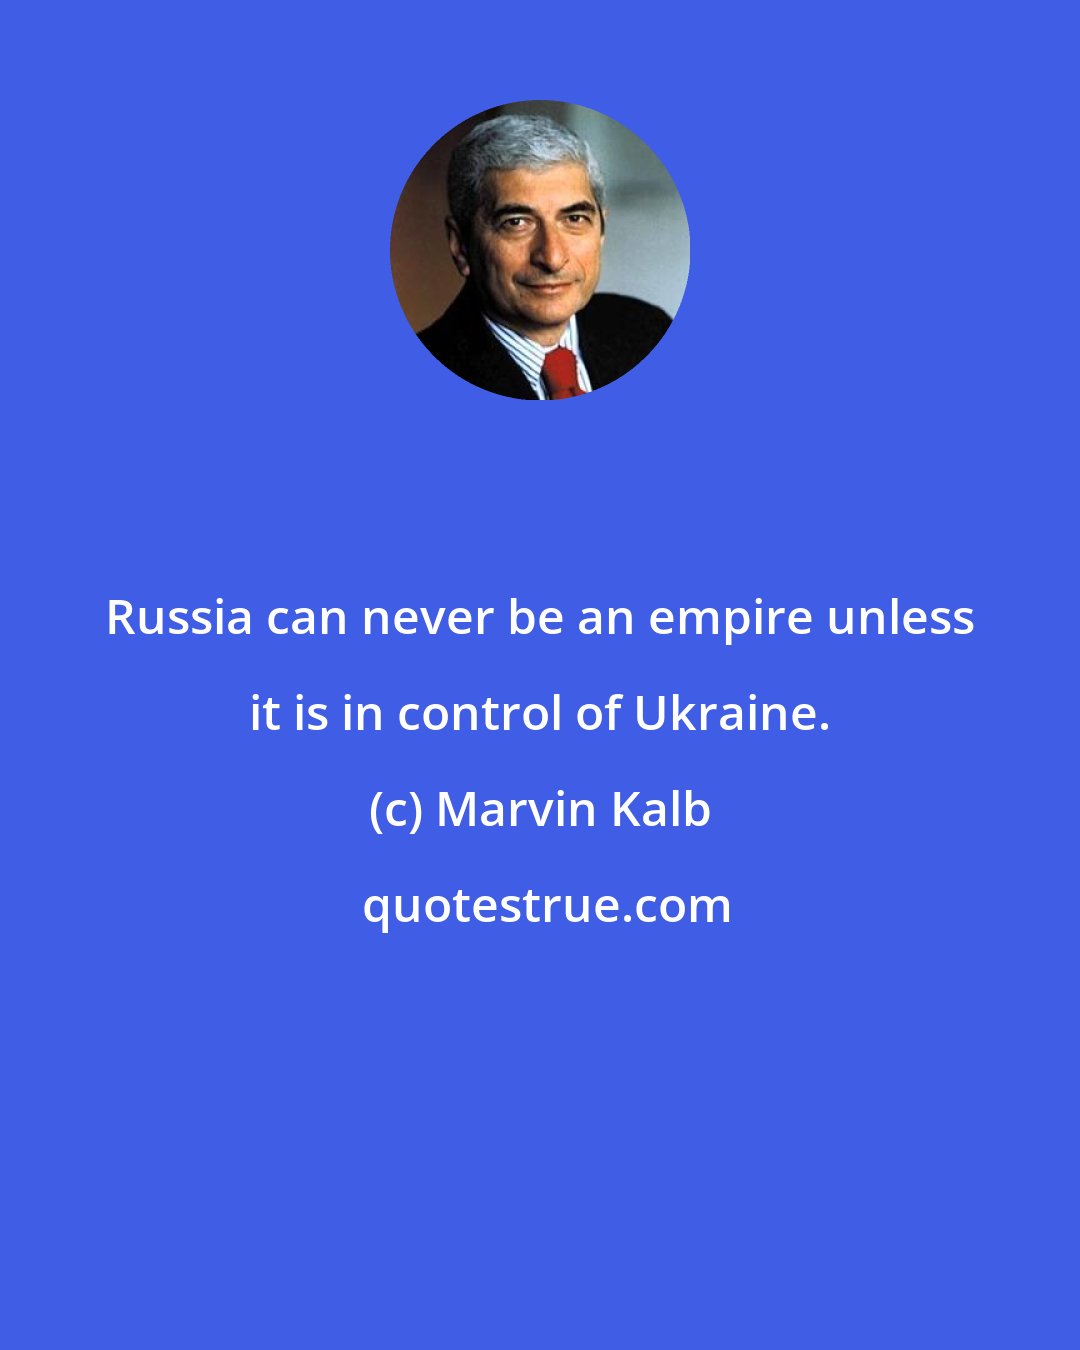 Marvin Kalb: Russia can never be an empire unless it is in control of Ukraine.